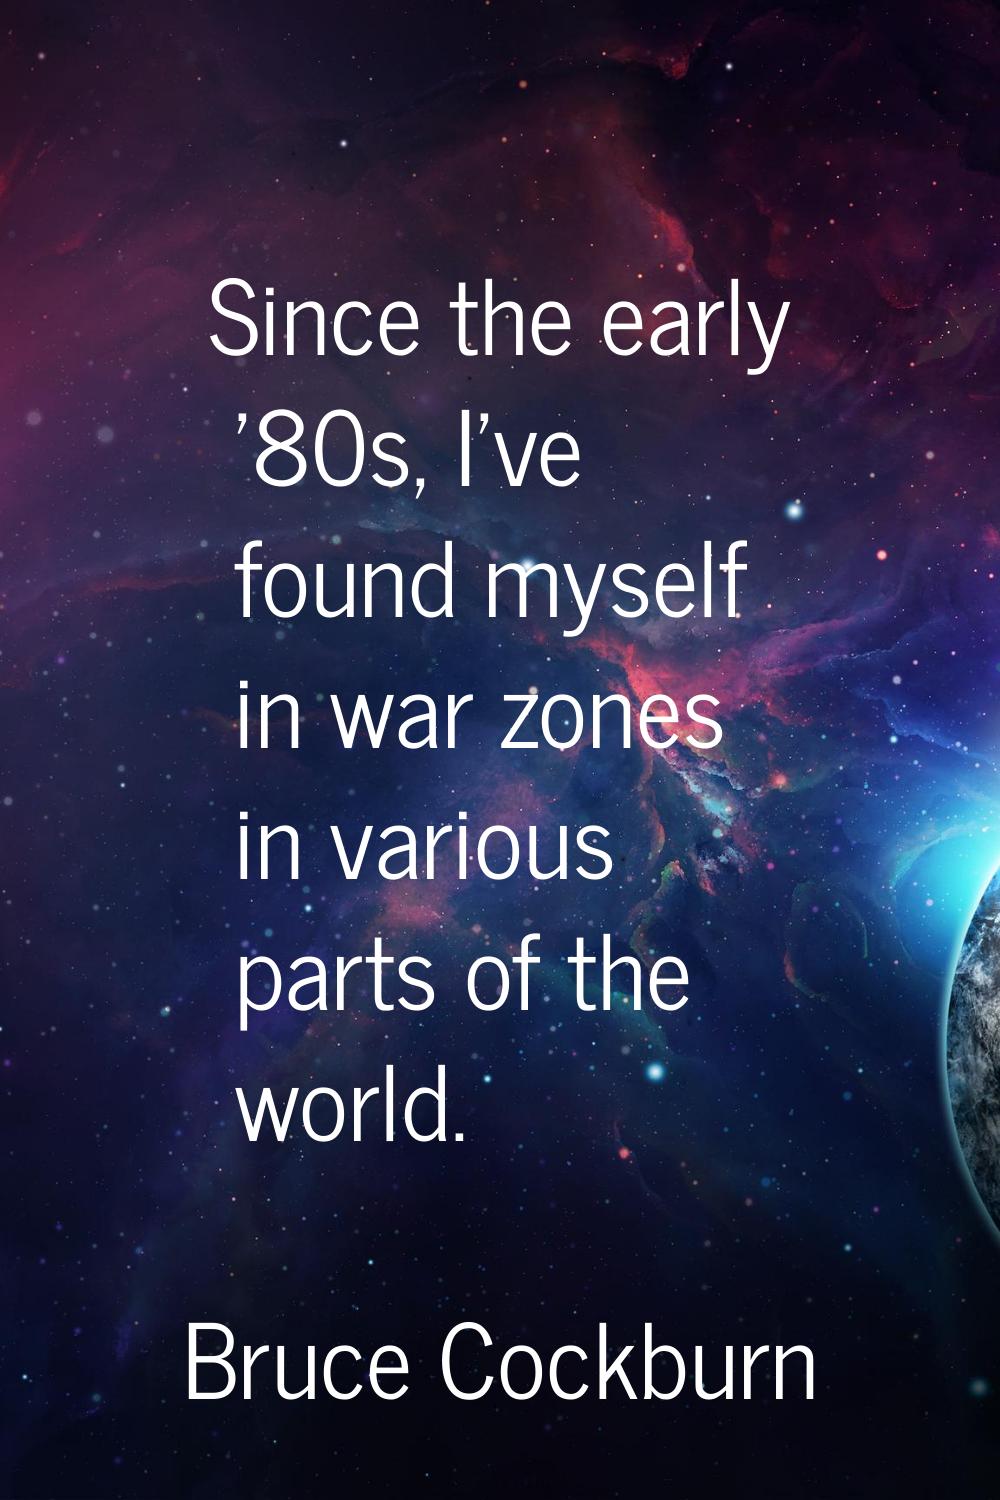 Since the early '80s, I've found myself in war zones in various parts of the world.